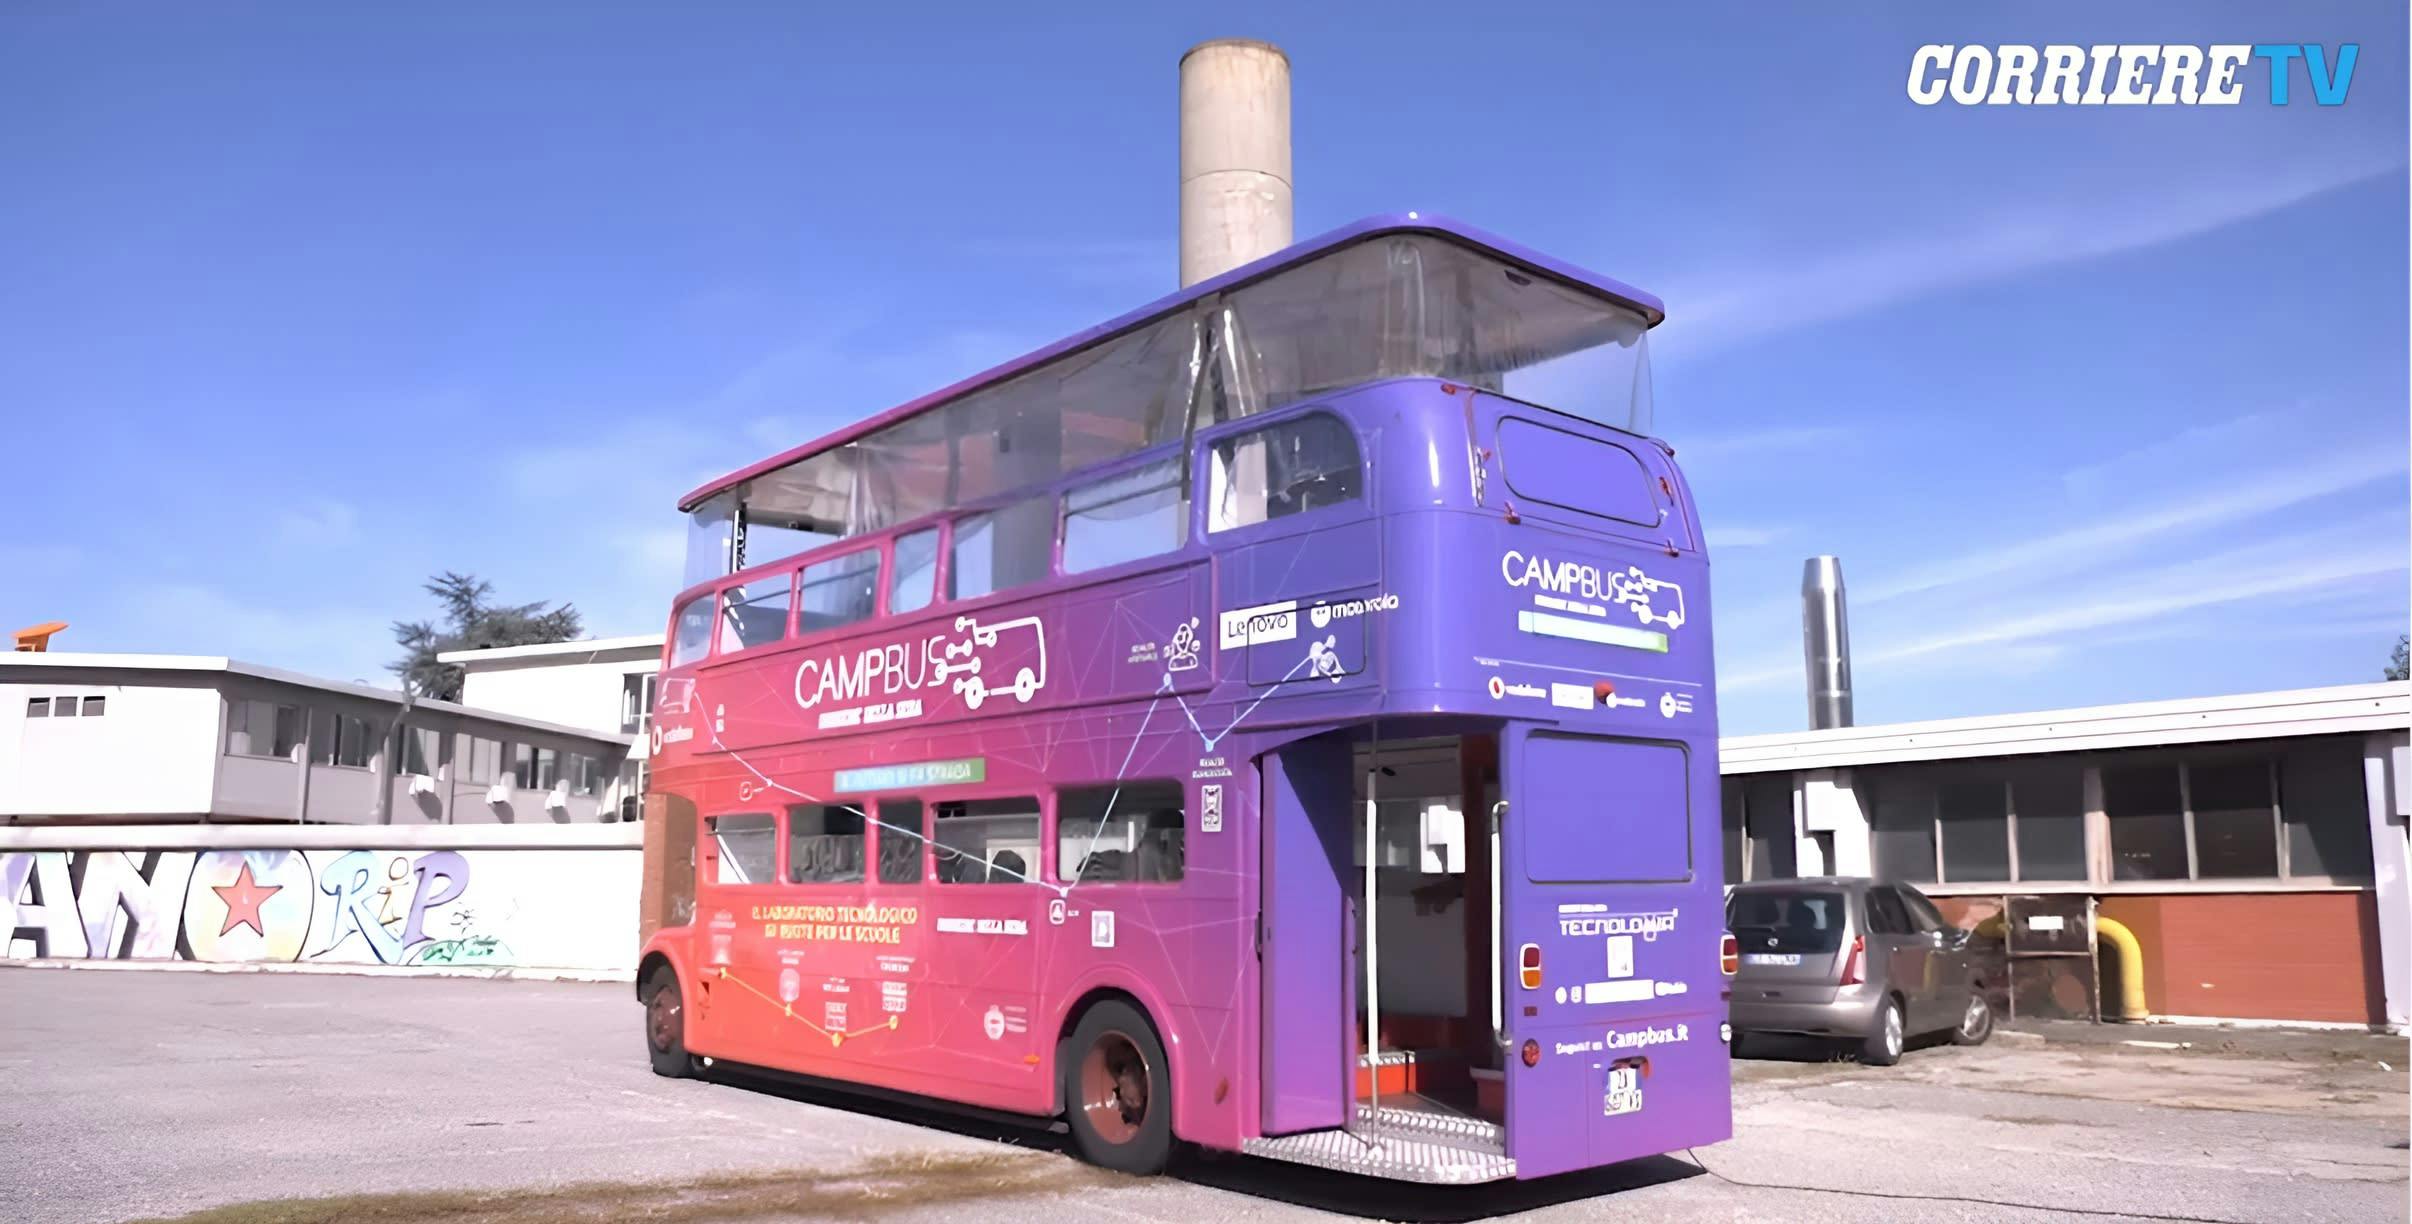 A purple double decker bus parked in a parking lot next to a building with graffiti on the side of it